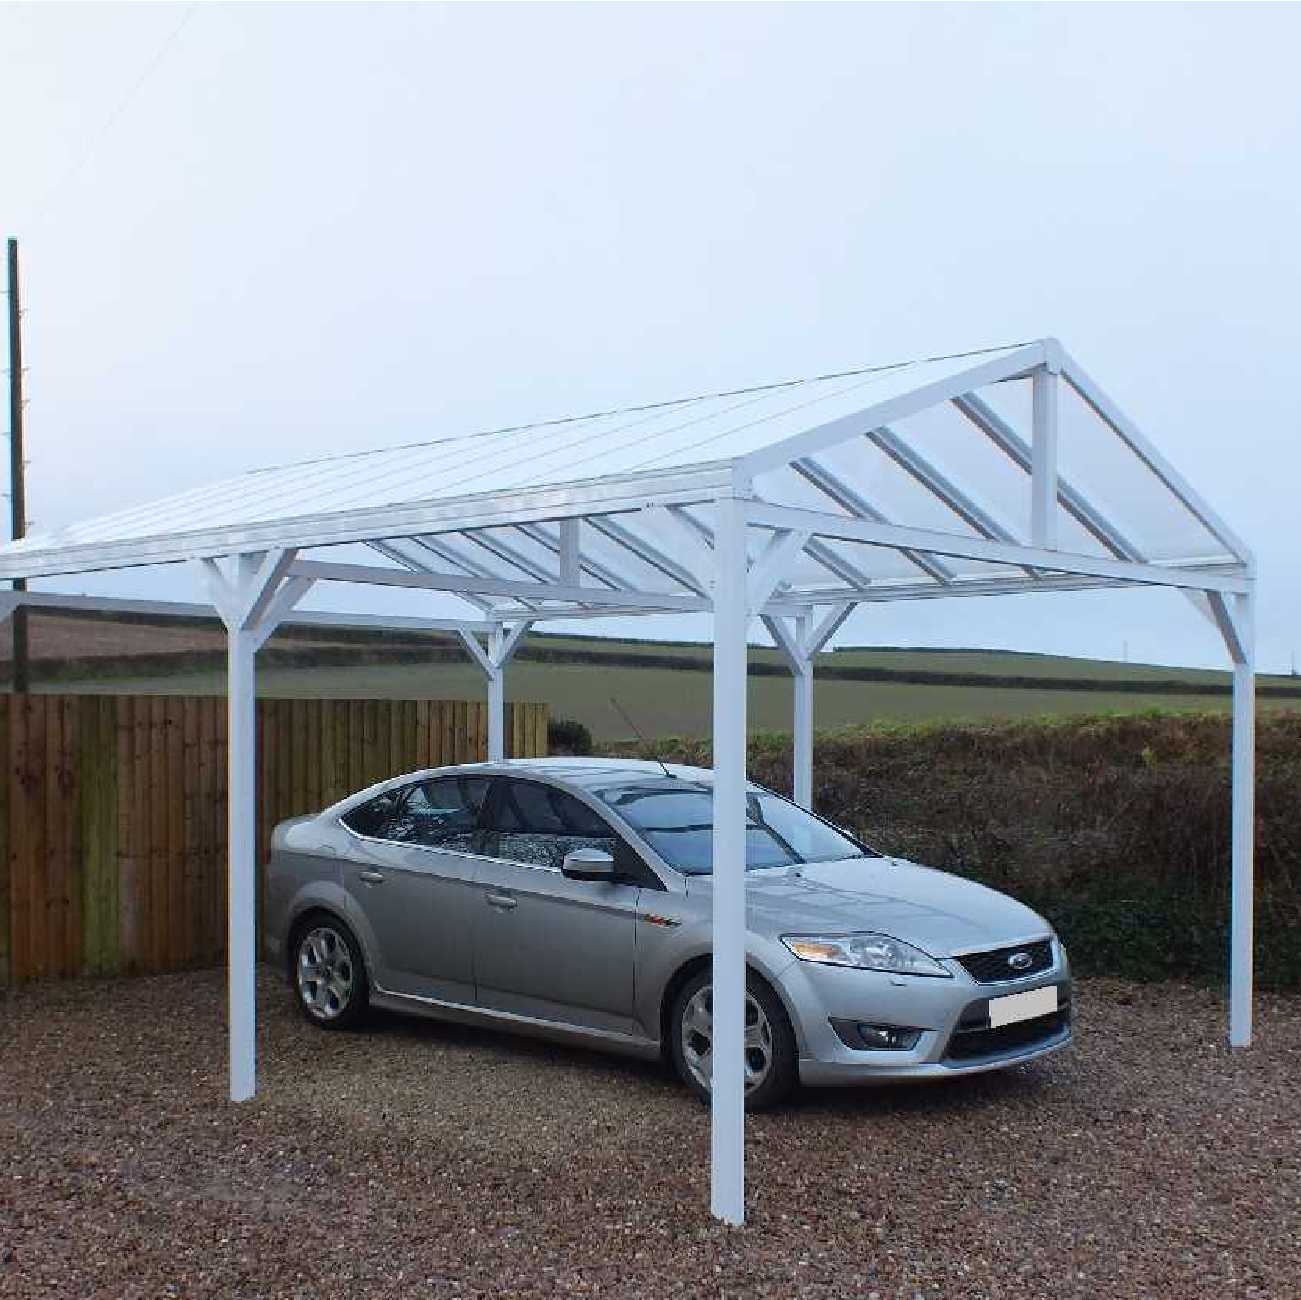 Affordable Omega Smart Free-Standing, White Gable-Roof (type 1) Canopy with 16mm Polycarbonate Glazing - 5.2m (W) x 3.5m (P), (6) Supporting Posts